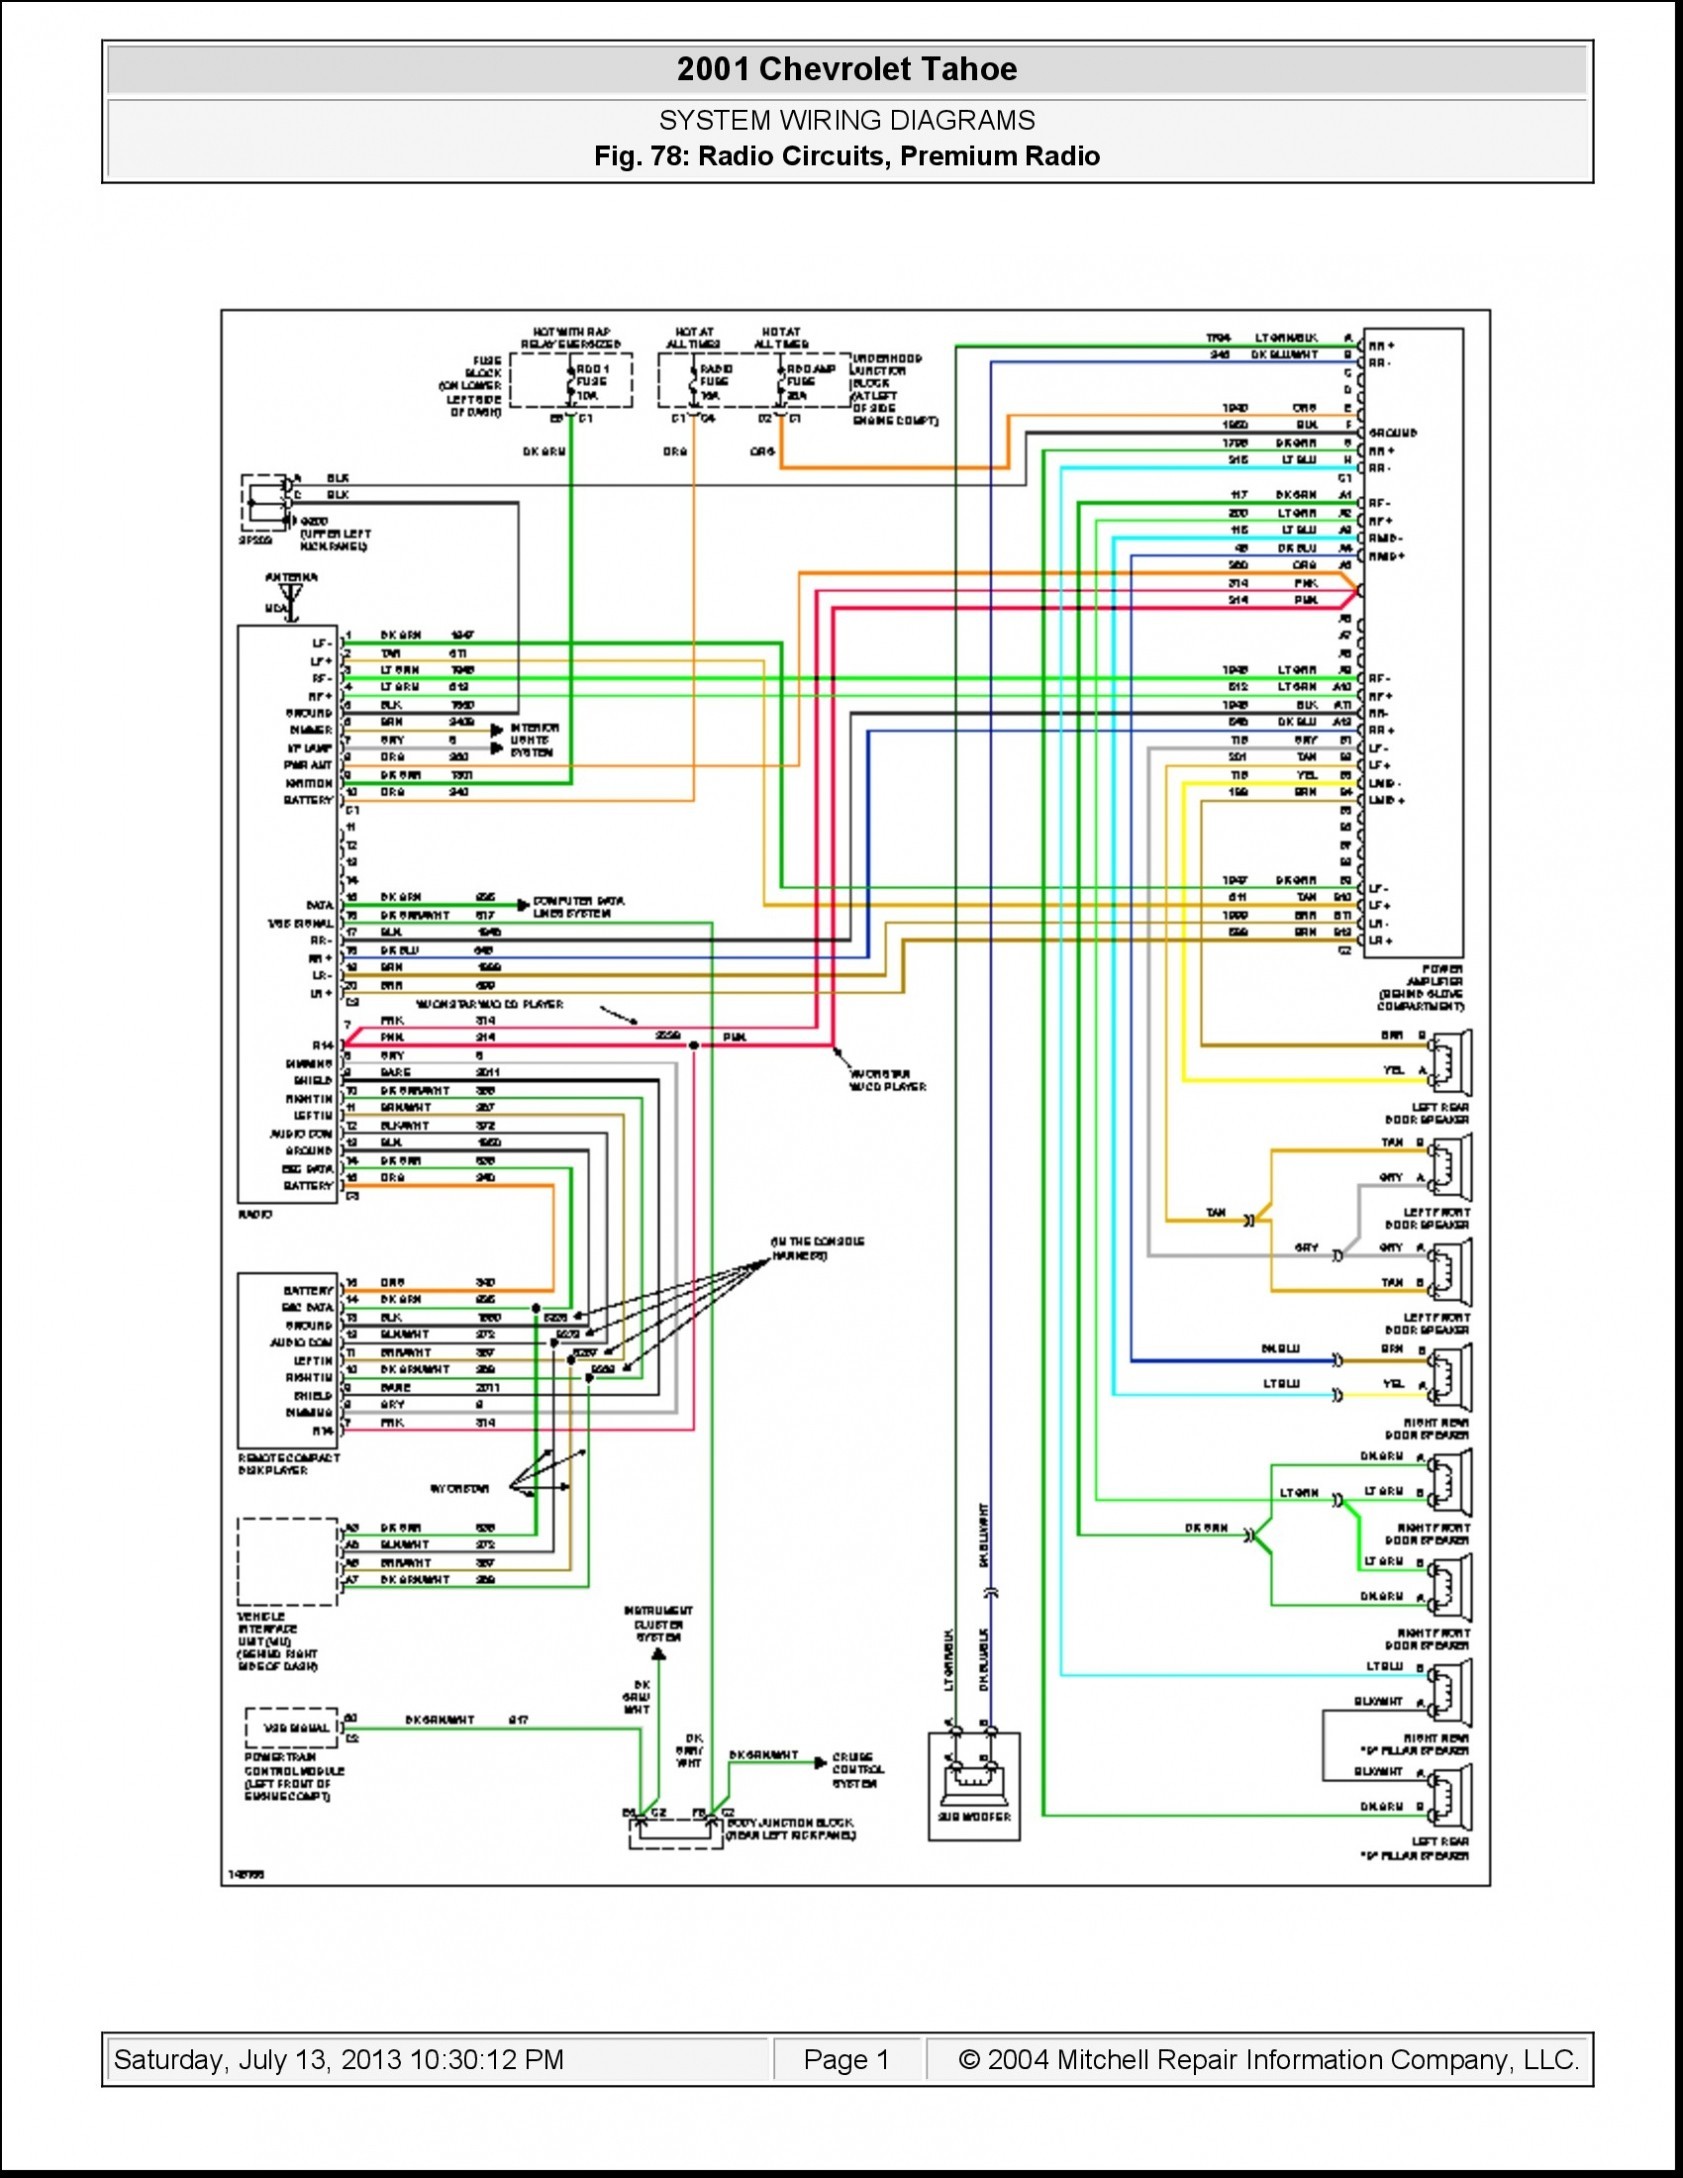 Wiring Diagram for Kenwood Car Stereo Wiring Diagram Kenwood Valid Car Radio Wiring Diagram – Http Of Wiring Diagram for Kenwood Car Stereo